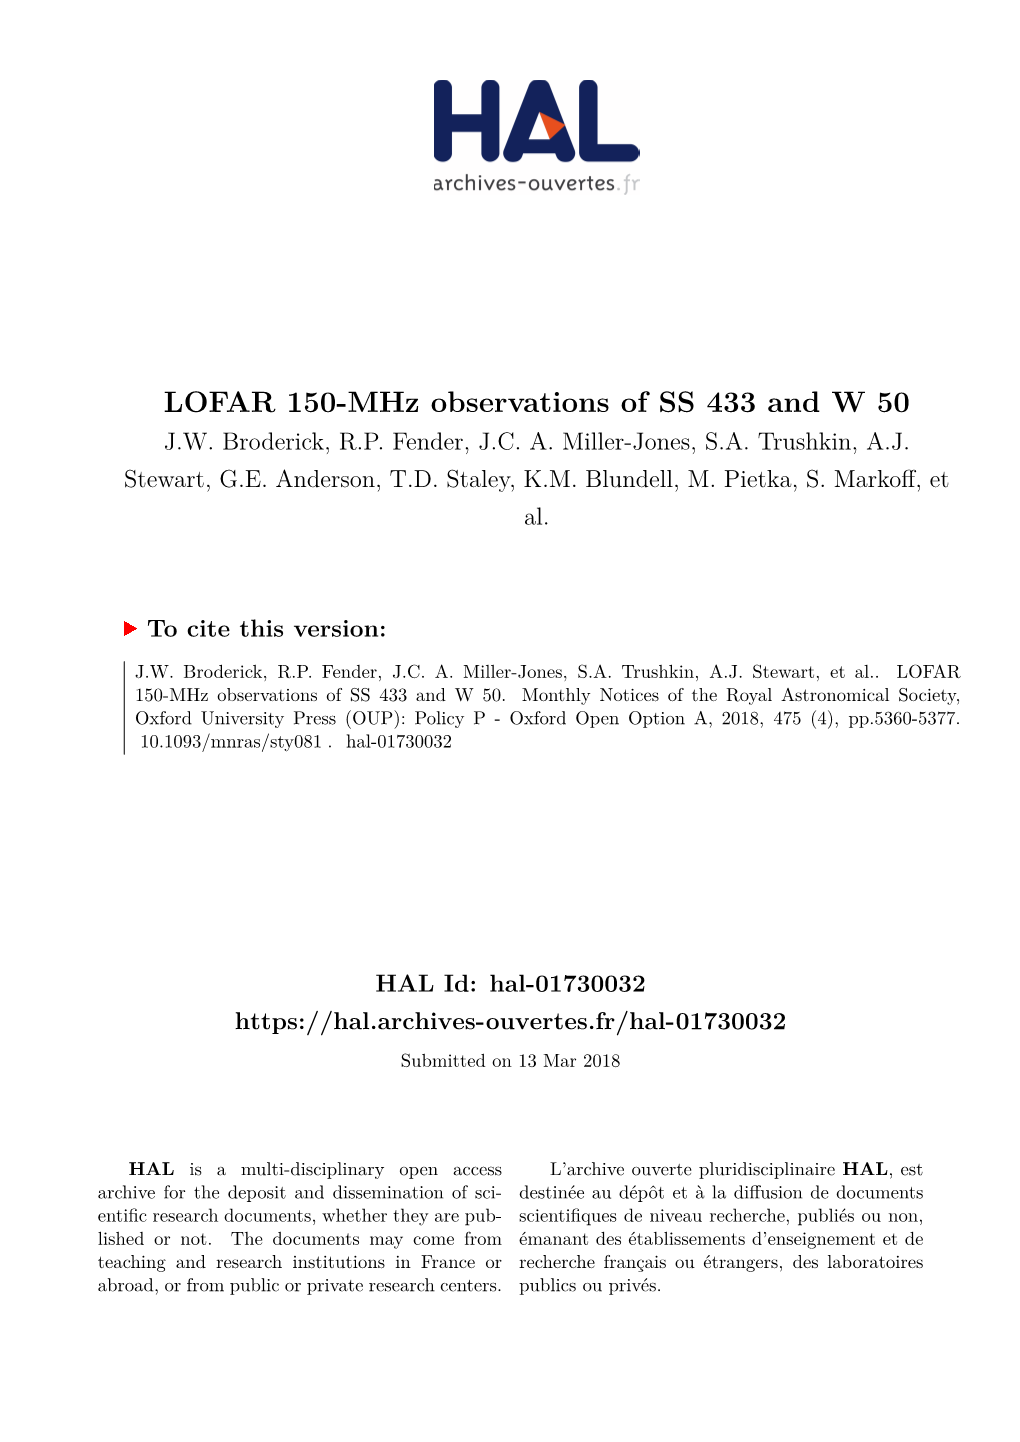 LOFAR 150-Mhz Observations of SS 433 and W 50 J.W